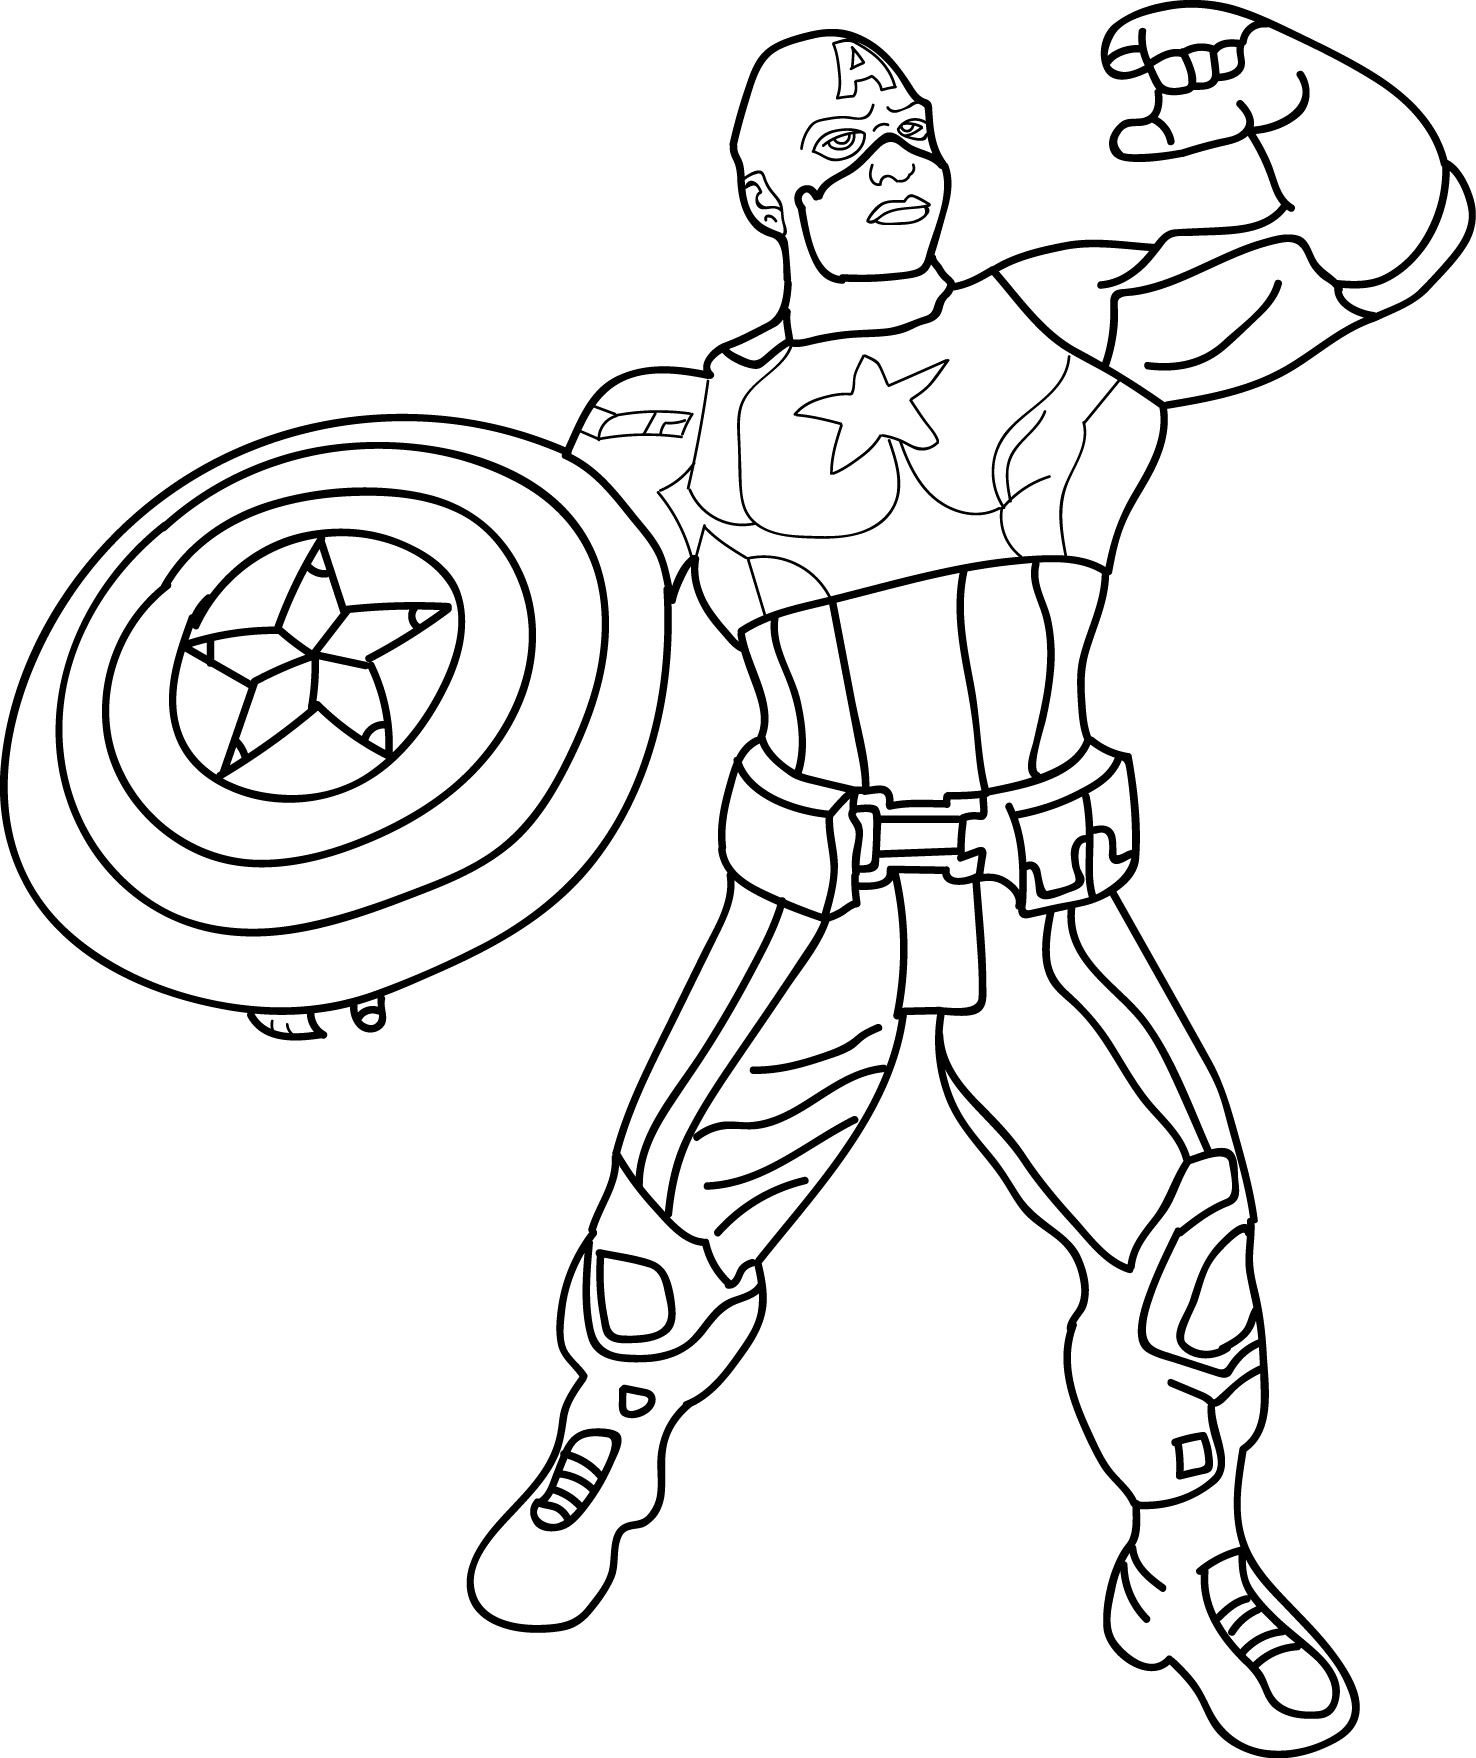 Captain America Coloring Pages Printable at Free